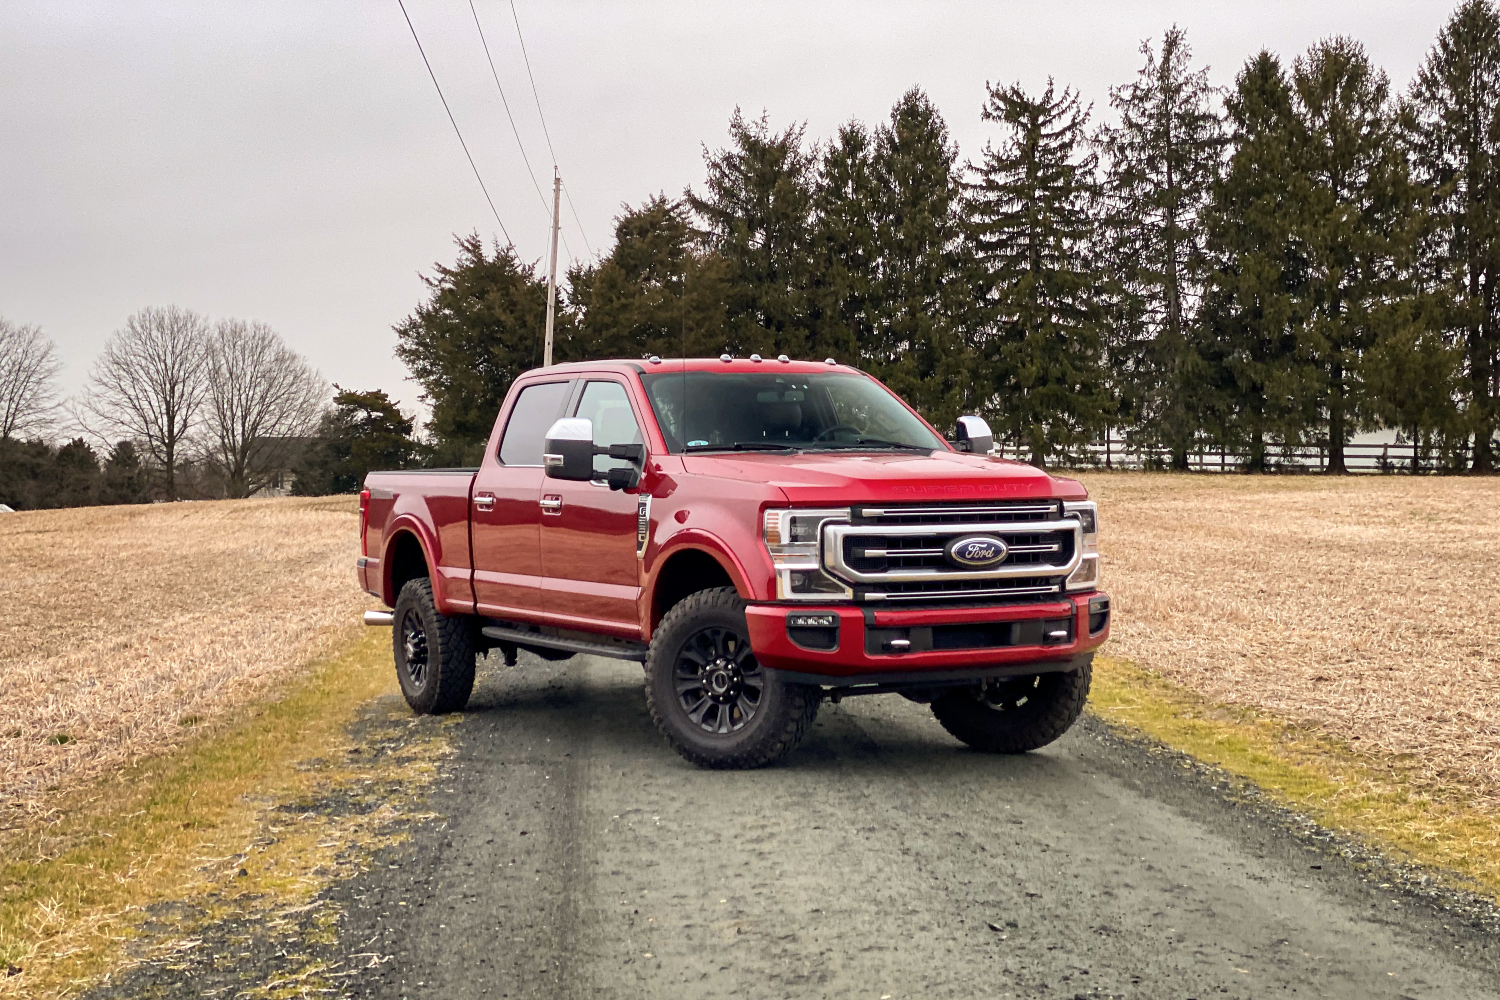 2020 Ford F-250 Tremor Review: A Tonka Truck For Adults - The Manual